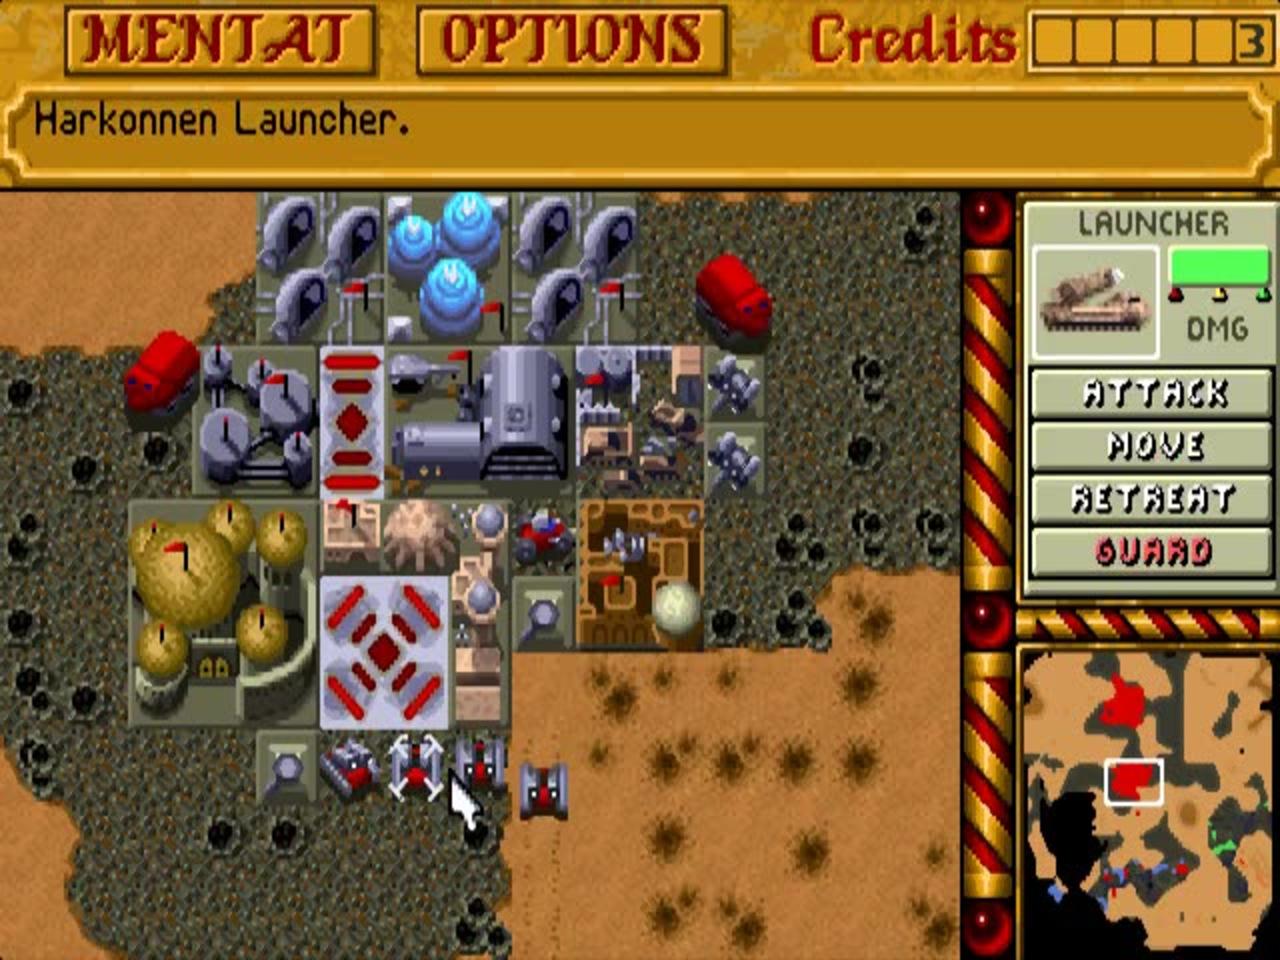 Dune 2 Let's Play 21